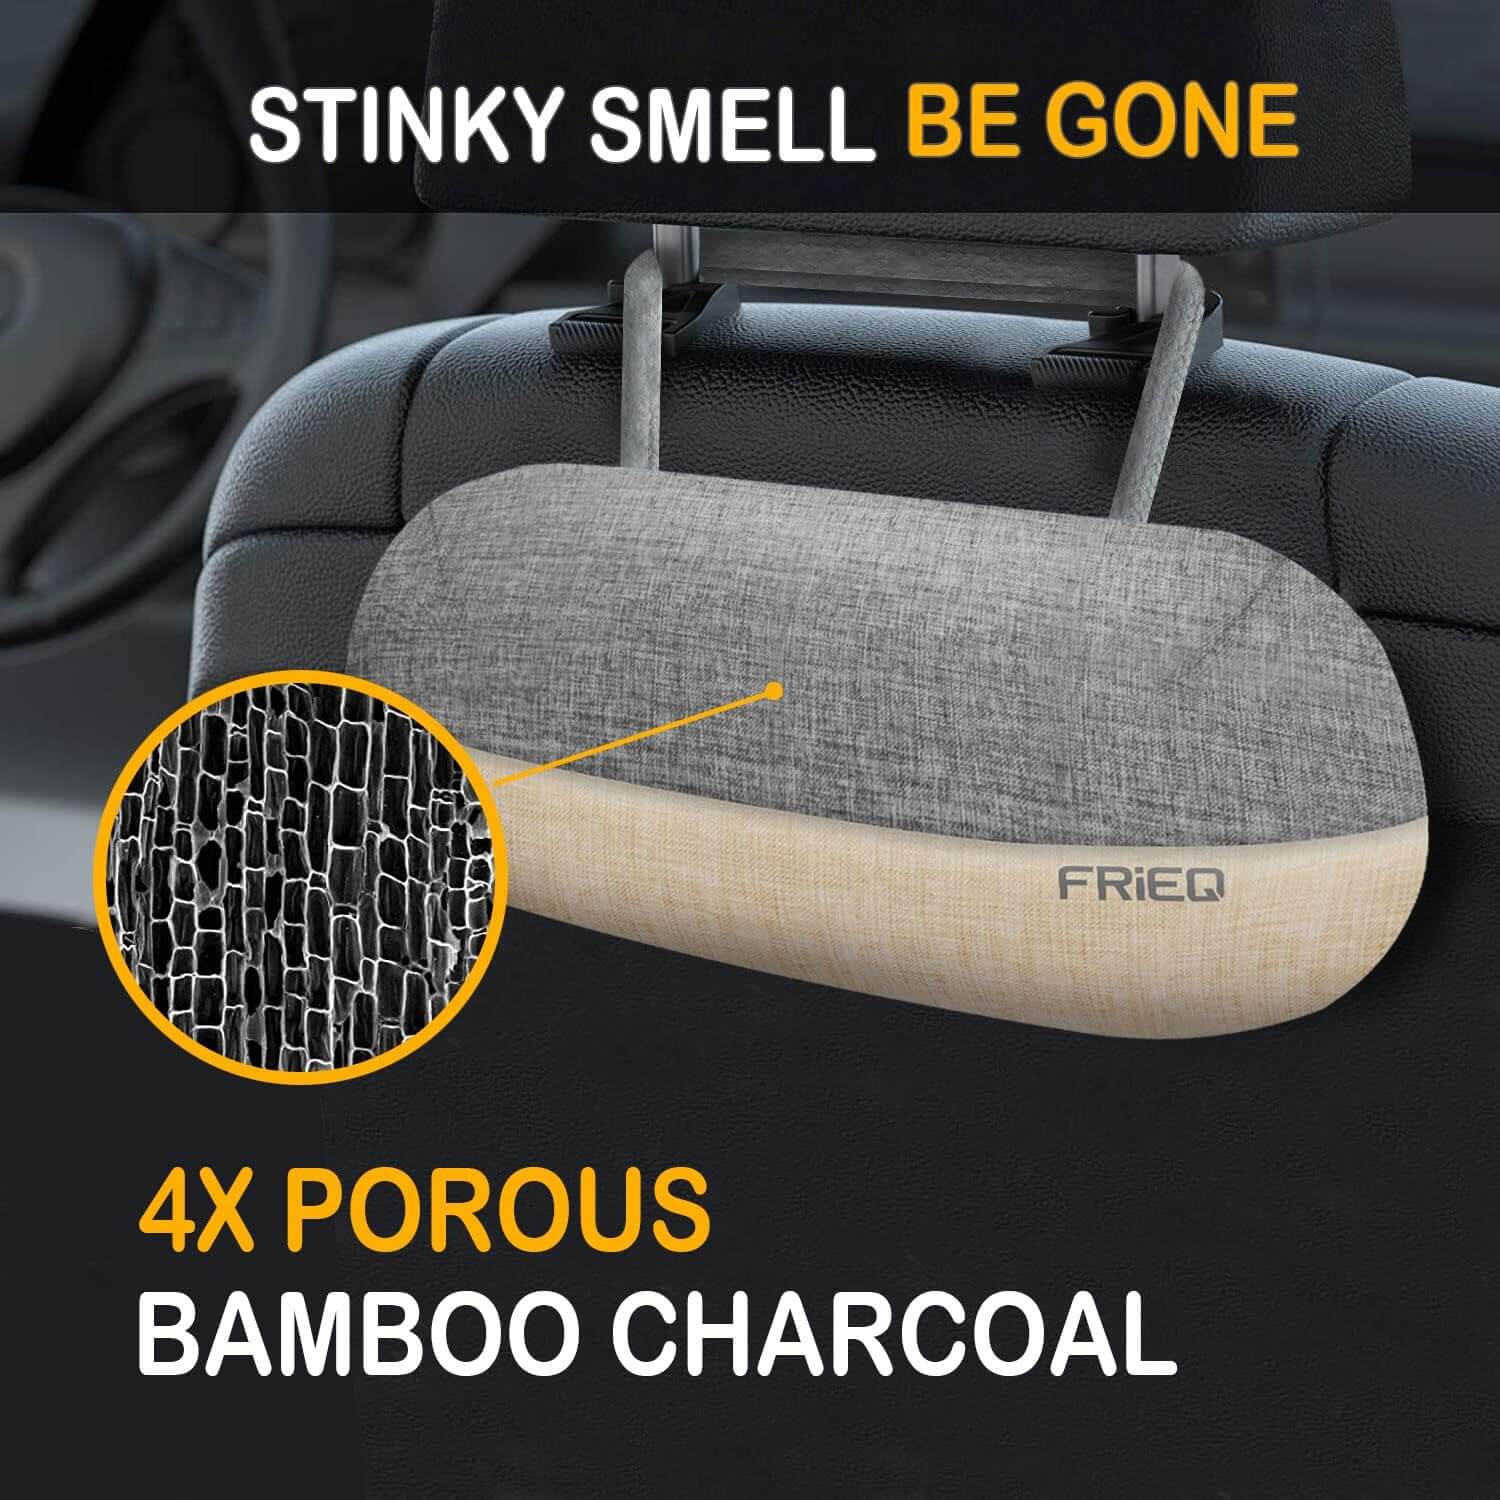 FRiEQ Car Air Freshener, 100% Activated Bamboo Charcoal Air Purifying Bag | Lasts 365+ Days | Fragrance-Free Deodorizer - Absorb Smoke Smell and Bad Odors（2 Pack） - 4X Porous Bamboo Charcoal